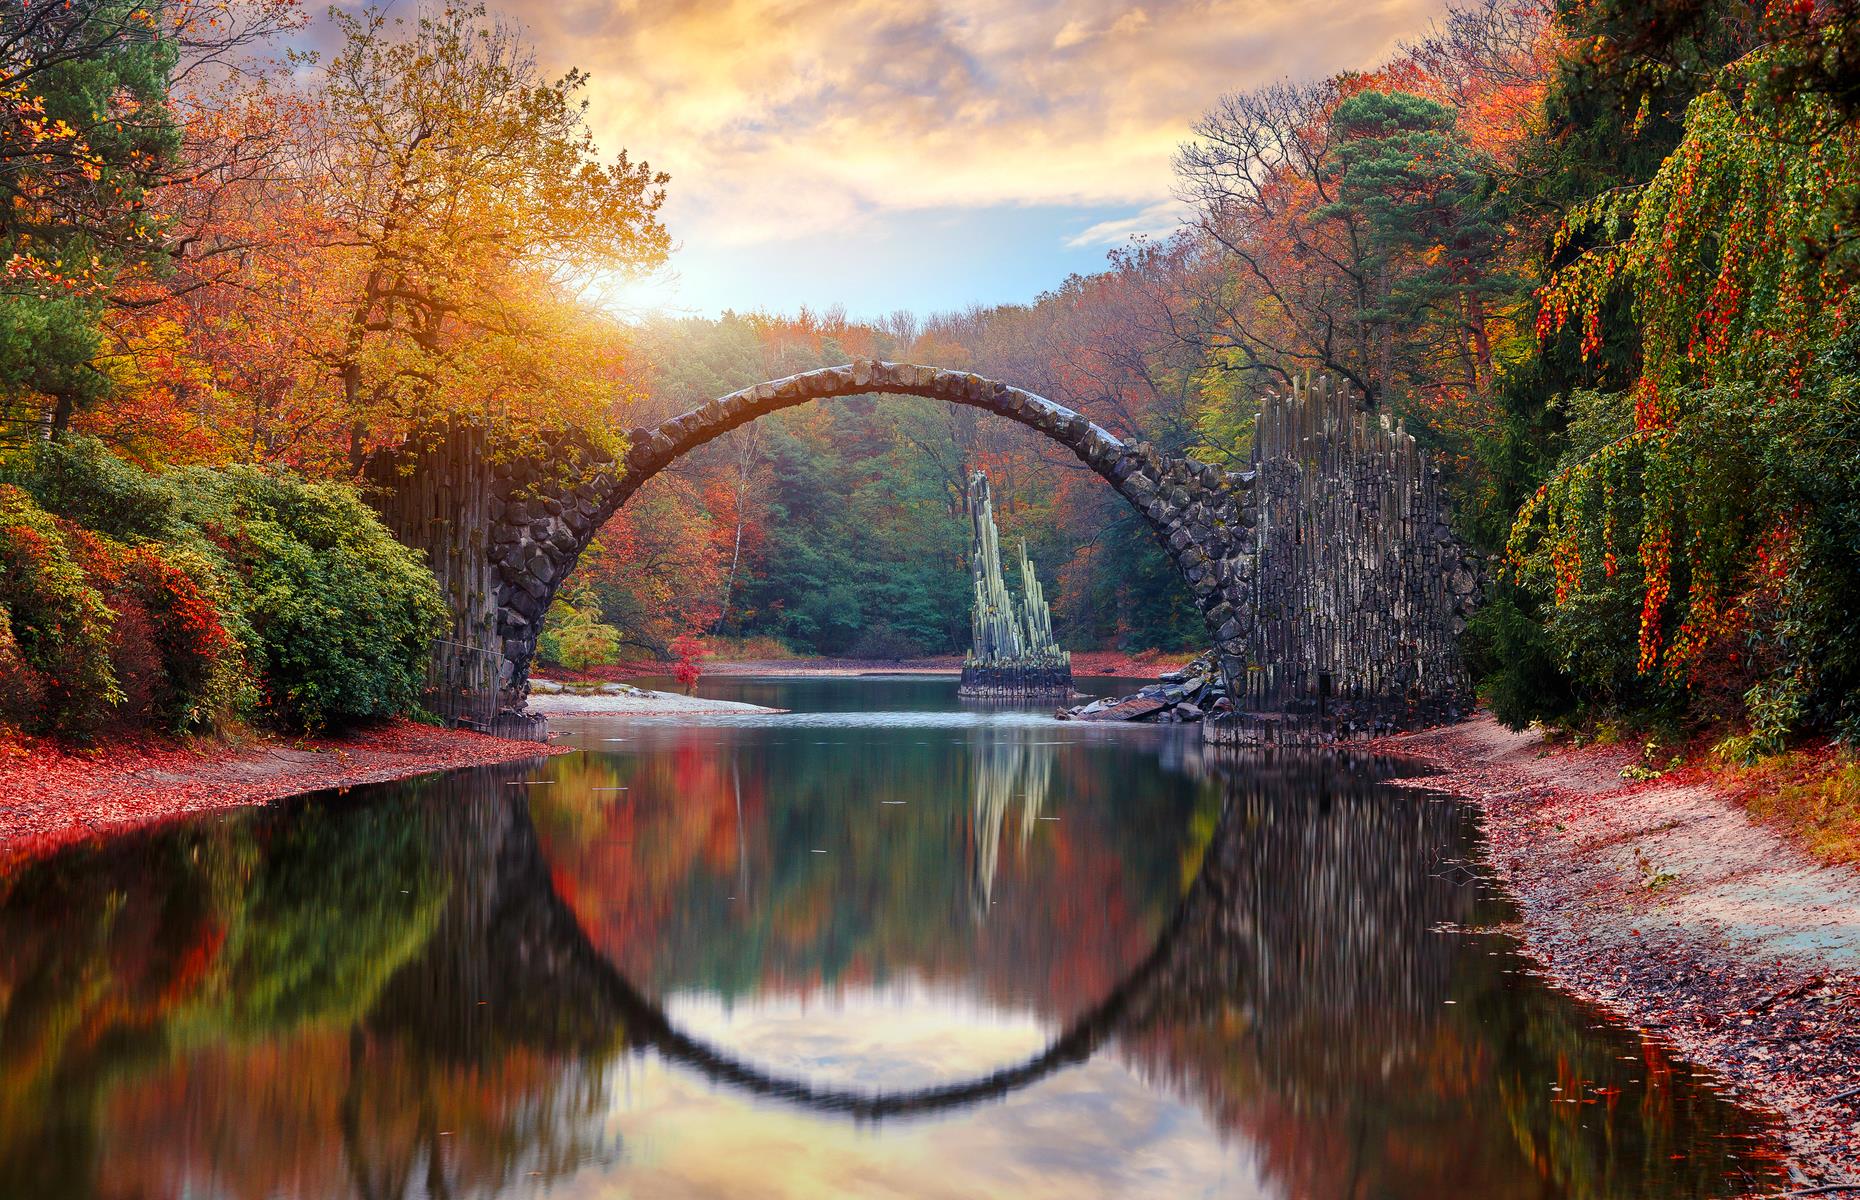 <p>Rakotzbrücke, in eastern Germany's Kromlauer Park, is one of several bridges in Europe to earn the moniker of the Devil's Bridge. The legend goes that the bridge, arching in a perfect semi-circle and reflecting in the still water below, is too perfect to have been made by human hands. It's said that Satan had a hand in its construction, claiming the soul of the first mortal to cross the structure in return. You can't cross the bridge but you can admire the devil's handiwork from afar.</p>